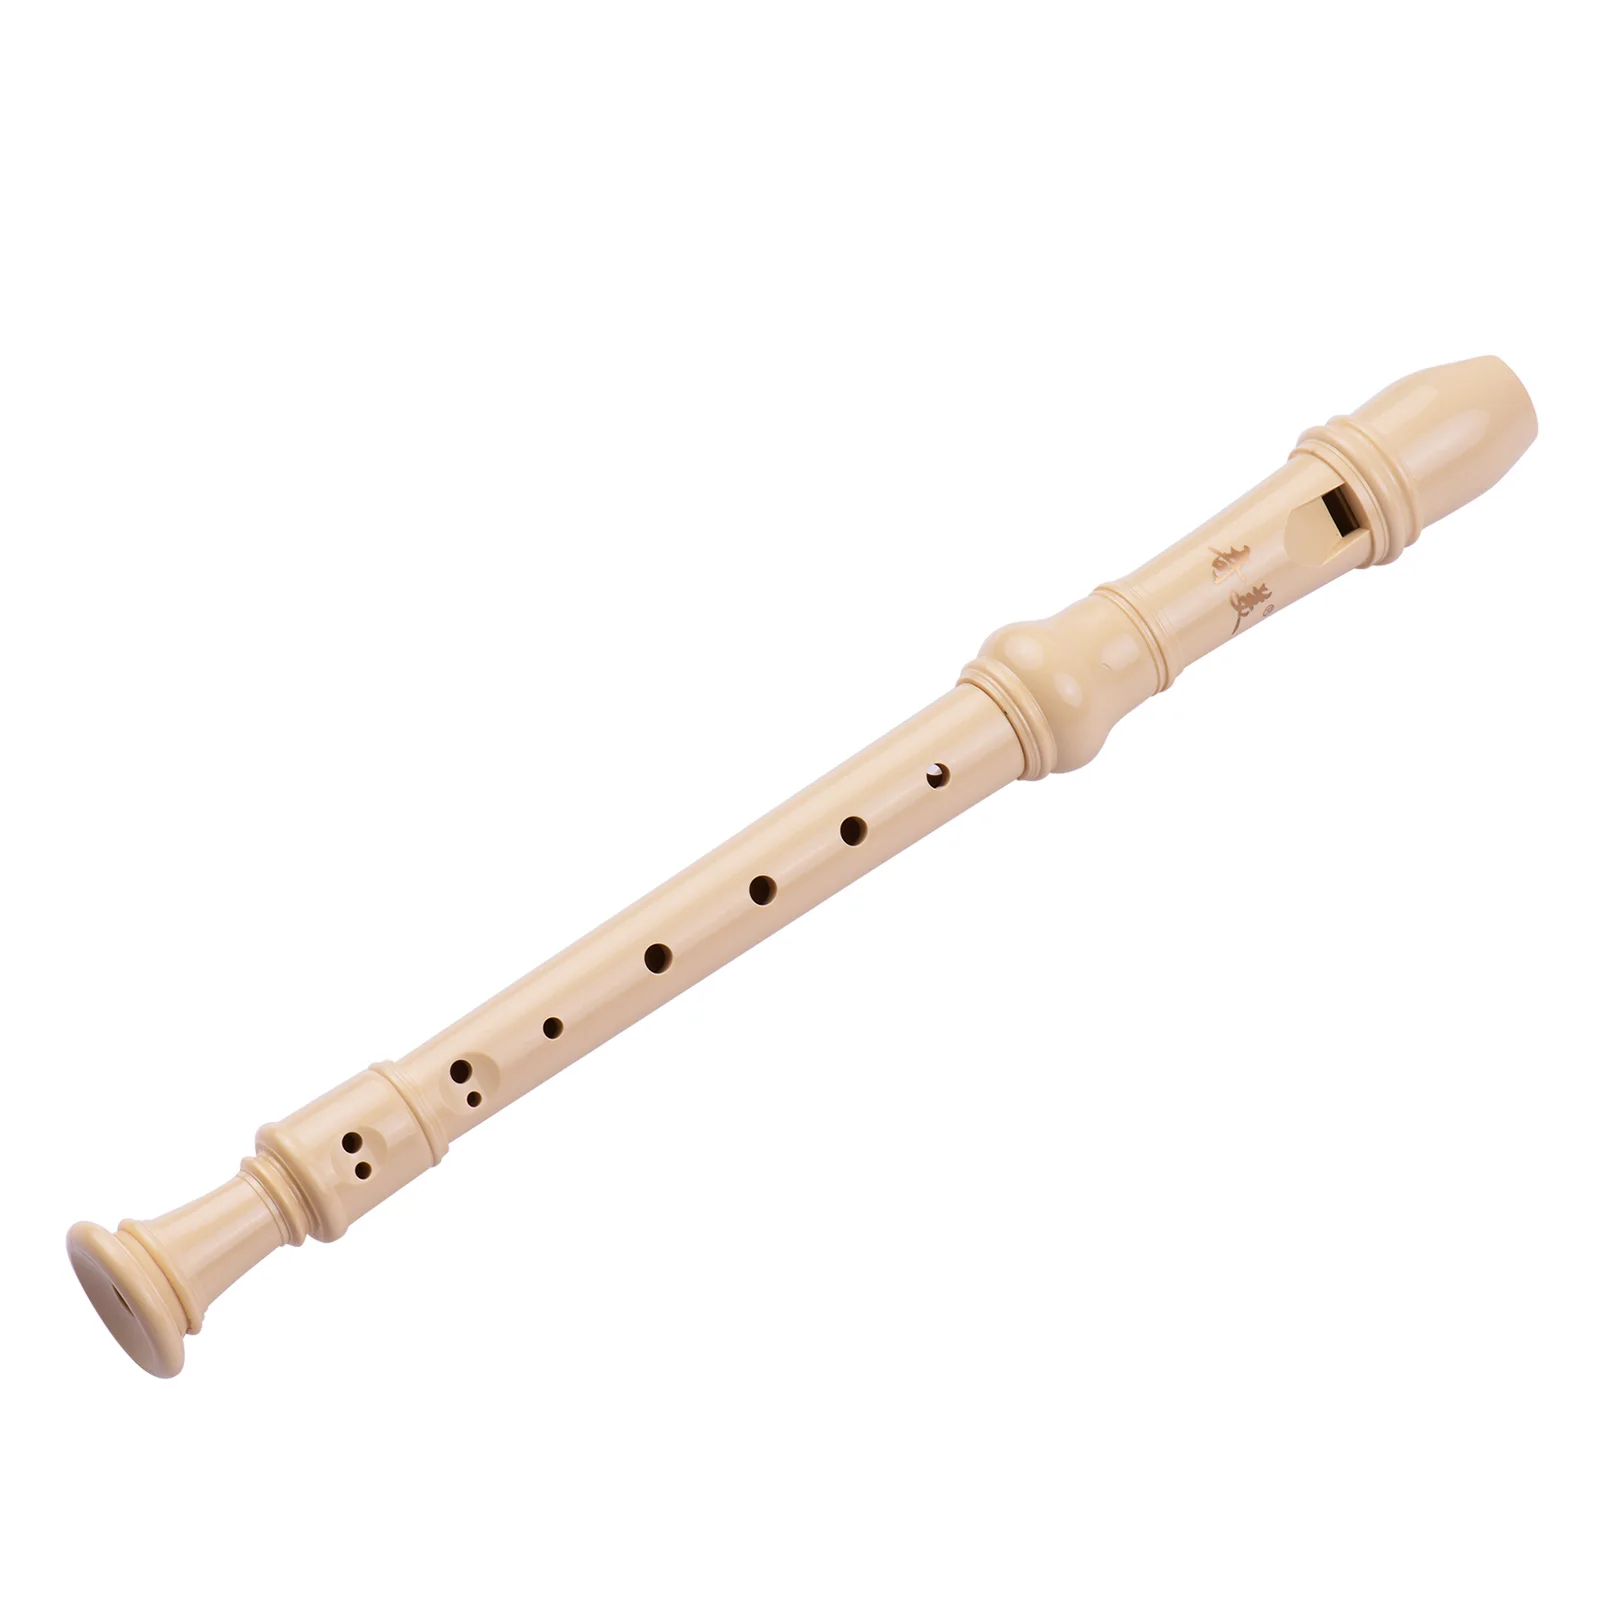 HUAWIND Descant Soprano Recorder German Style 8 Hole with Cleaning Rod 2 PCS Storage Bag Ivory White 